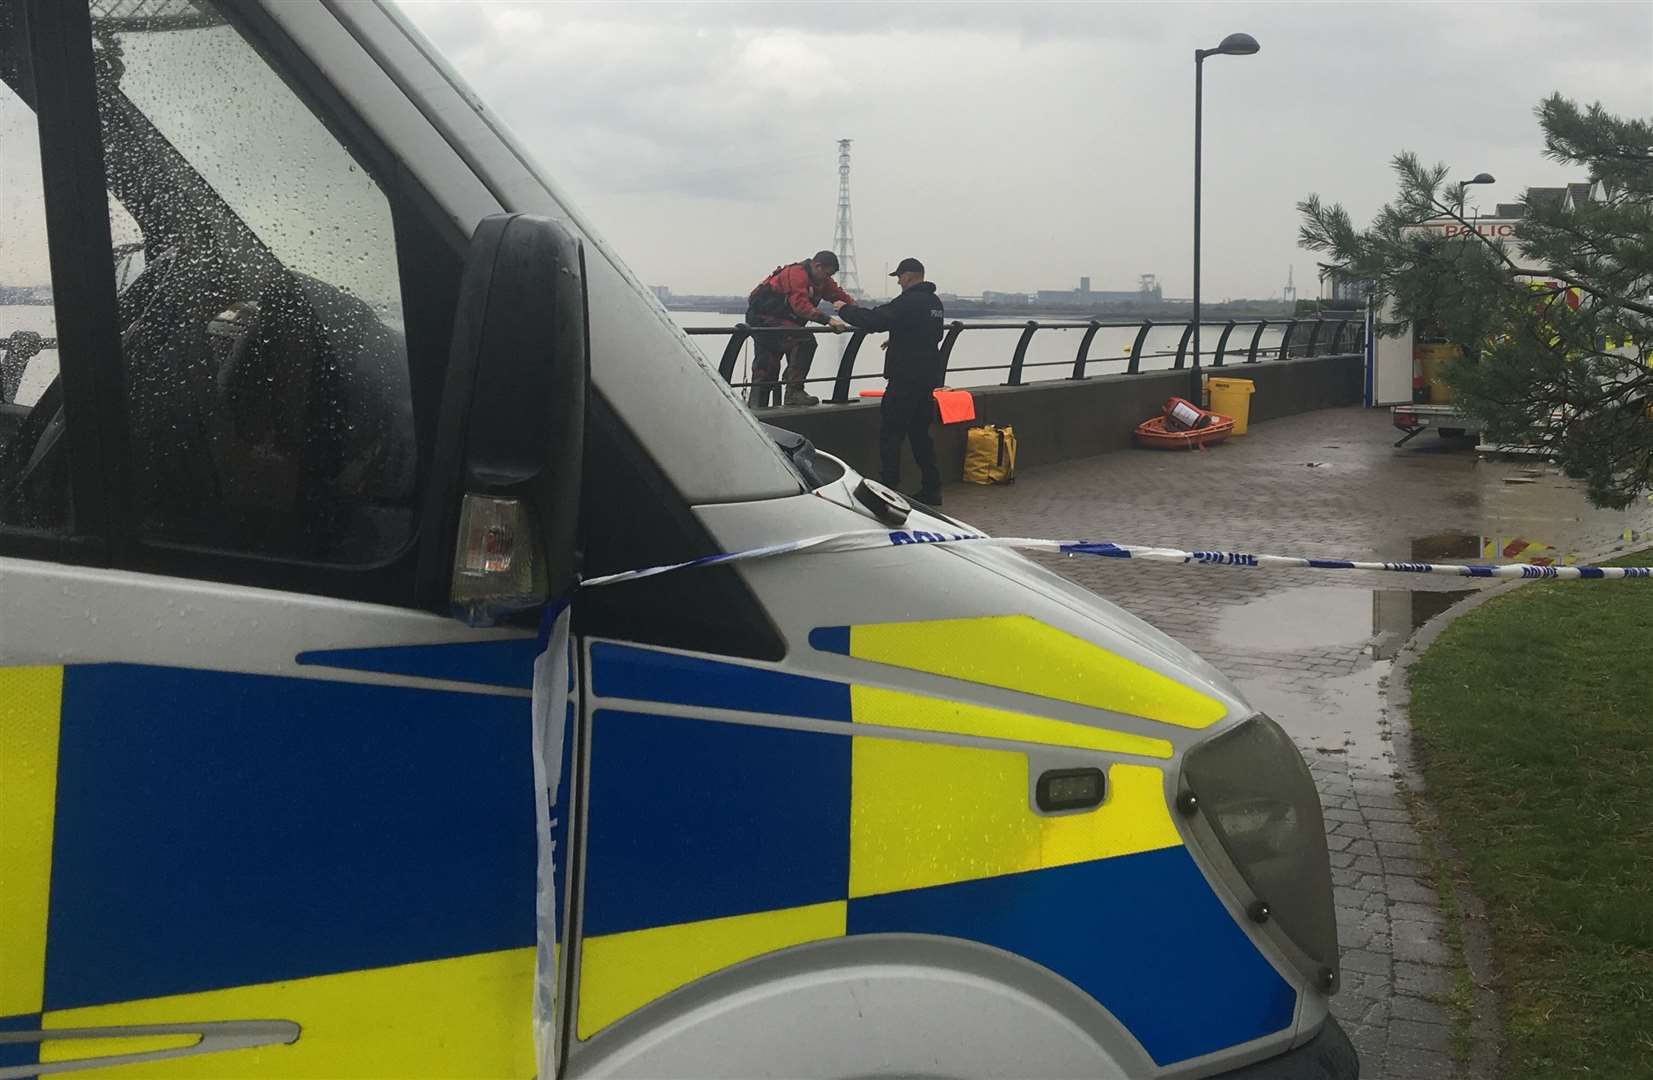 Police marine teams earlier searched the banks of the River Thames in a bid to find Sarah Wellgreen